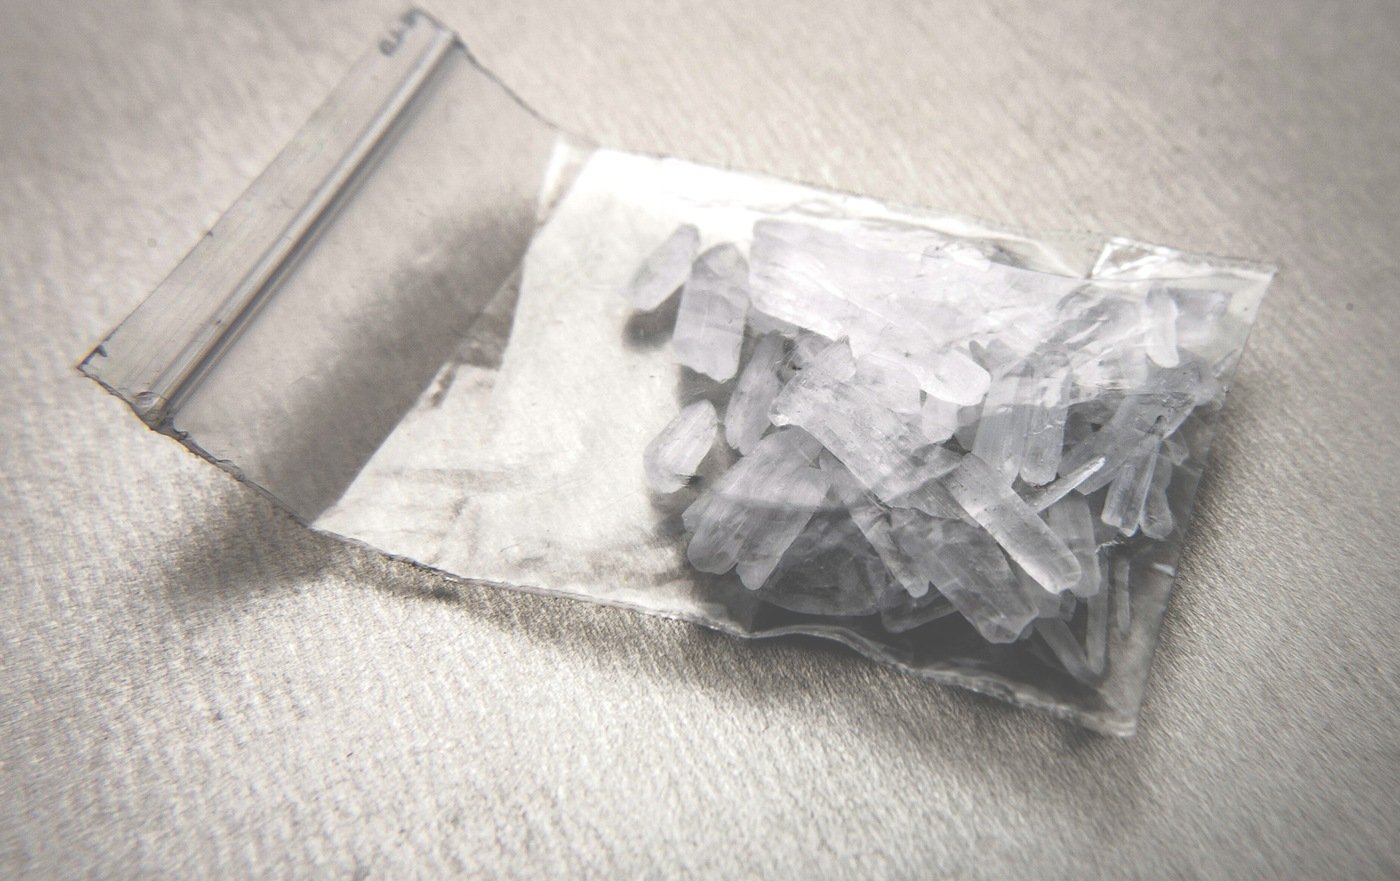 Stock image of a bag of methamphetamine in the form known as crystal meth.